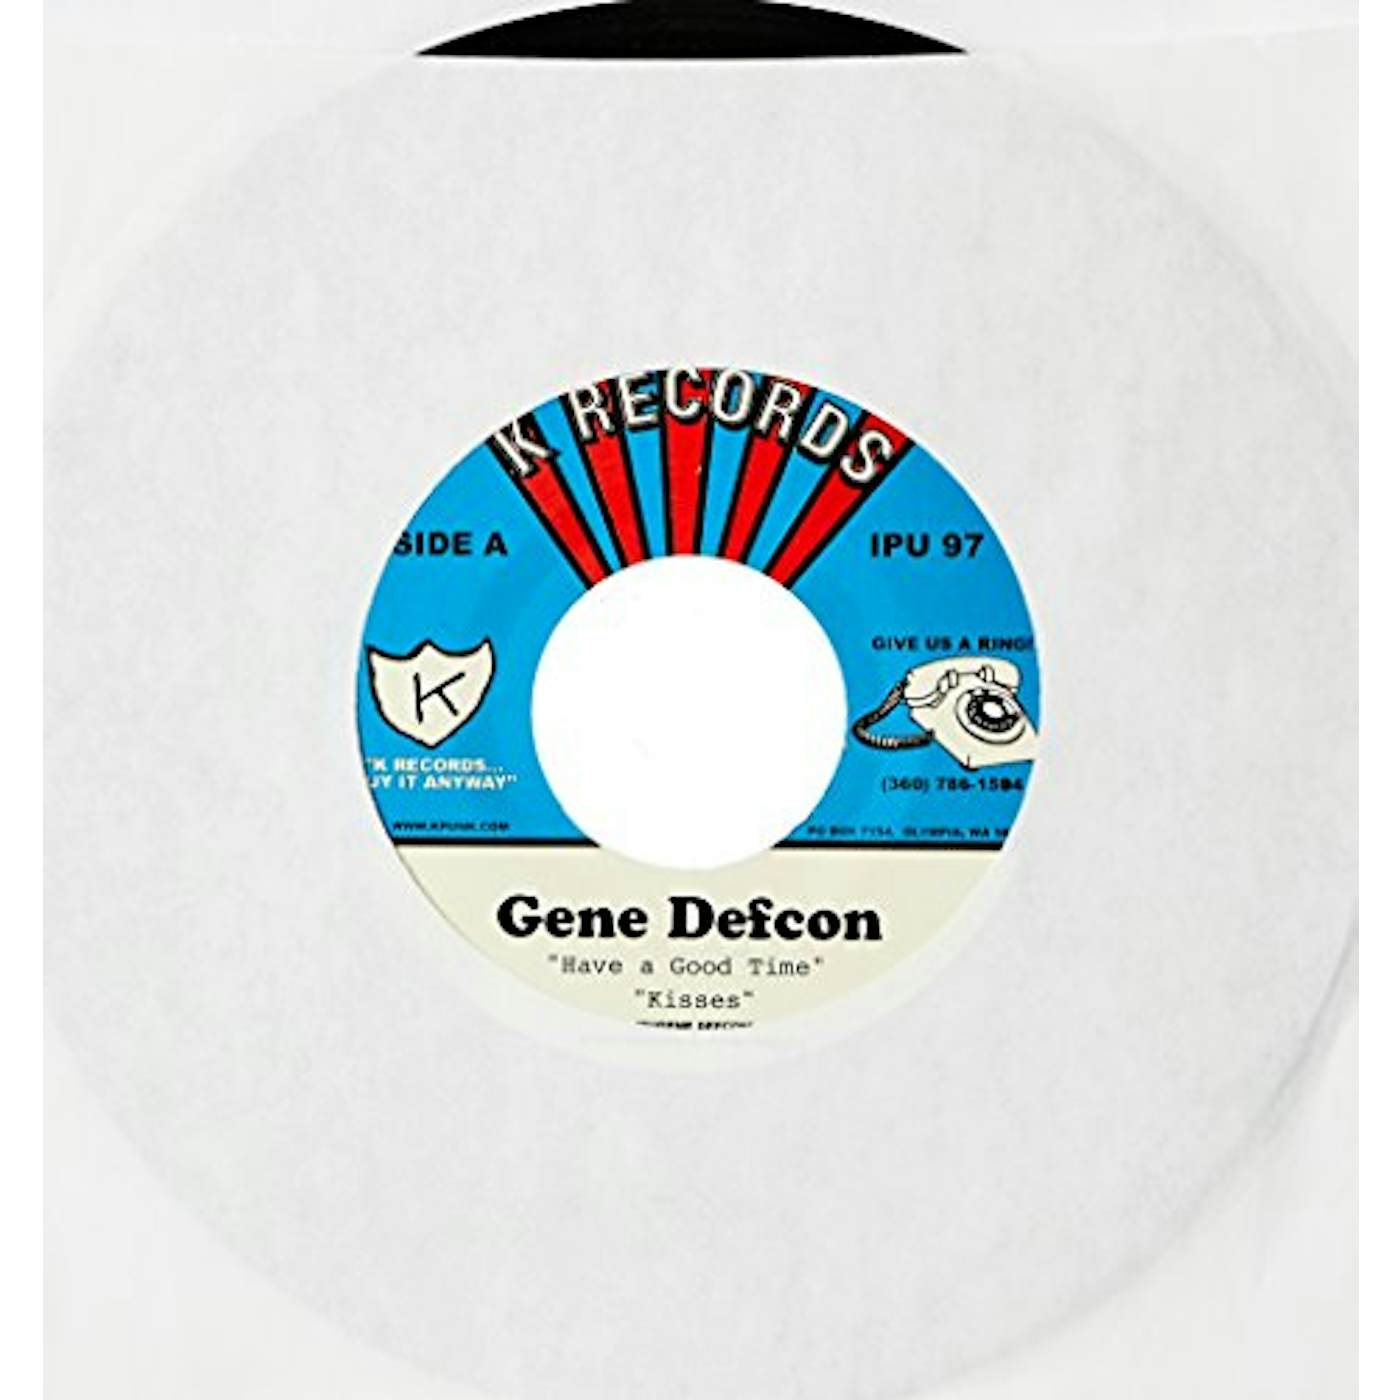 Gene Defcon HAVE A GOOD TIME Vinyl Record